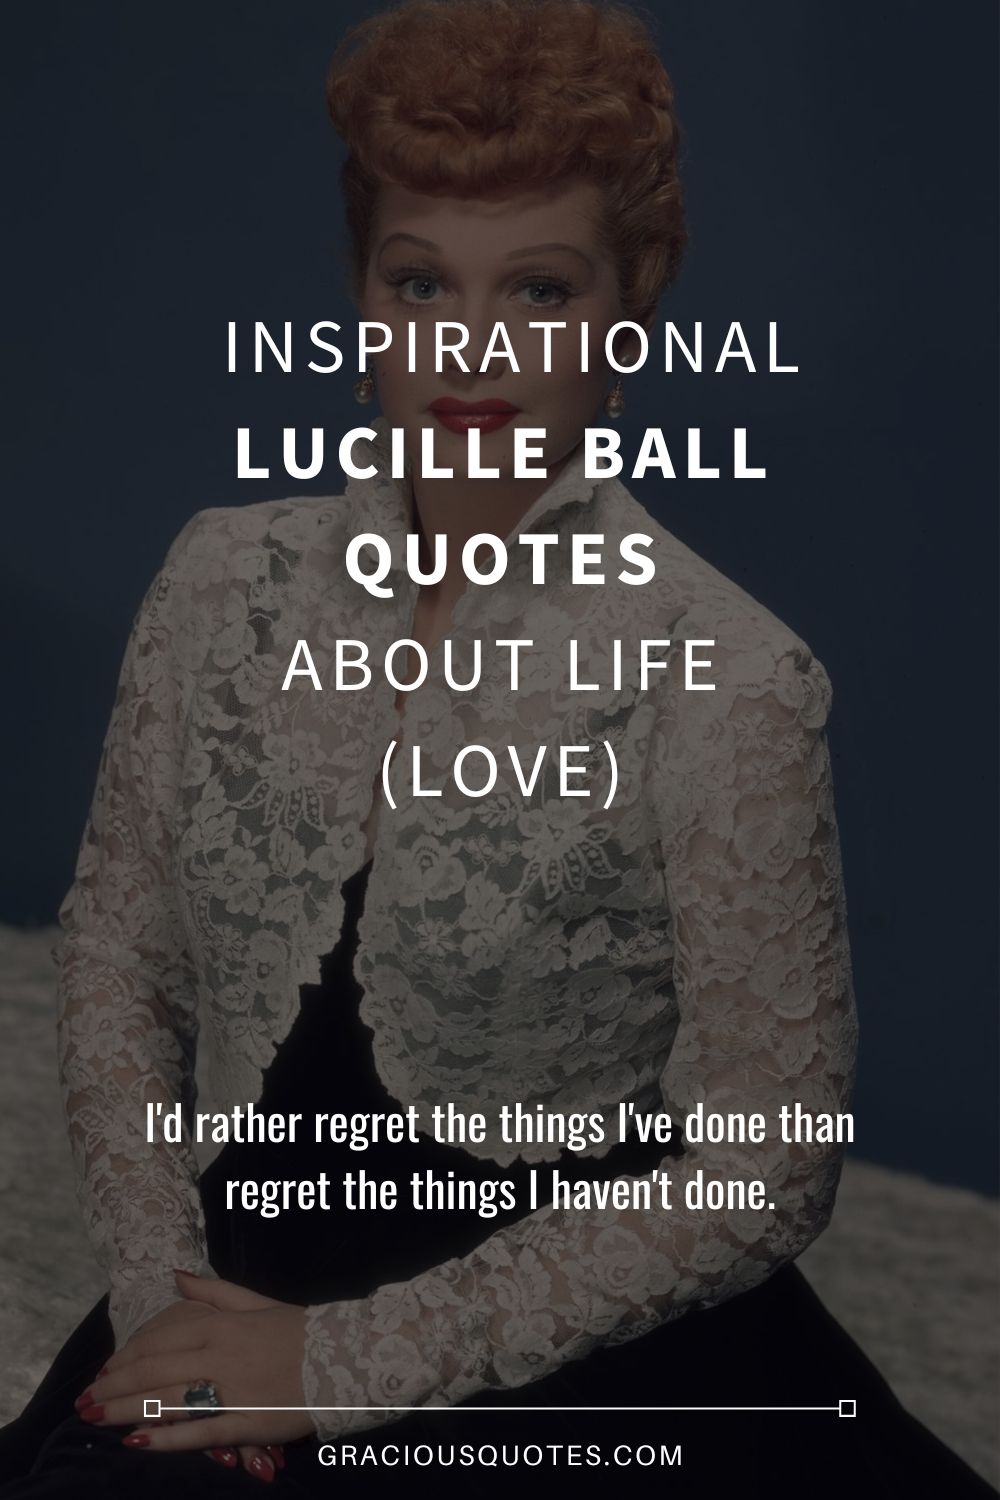 Inspirational Lucille Ball Quotes About Life (LOVE) - Gracious Quotes